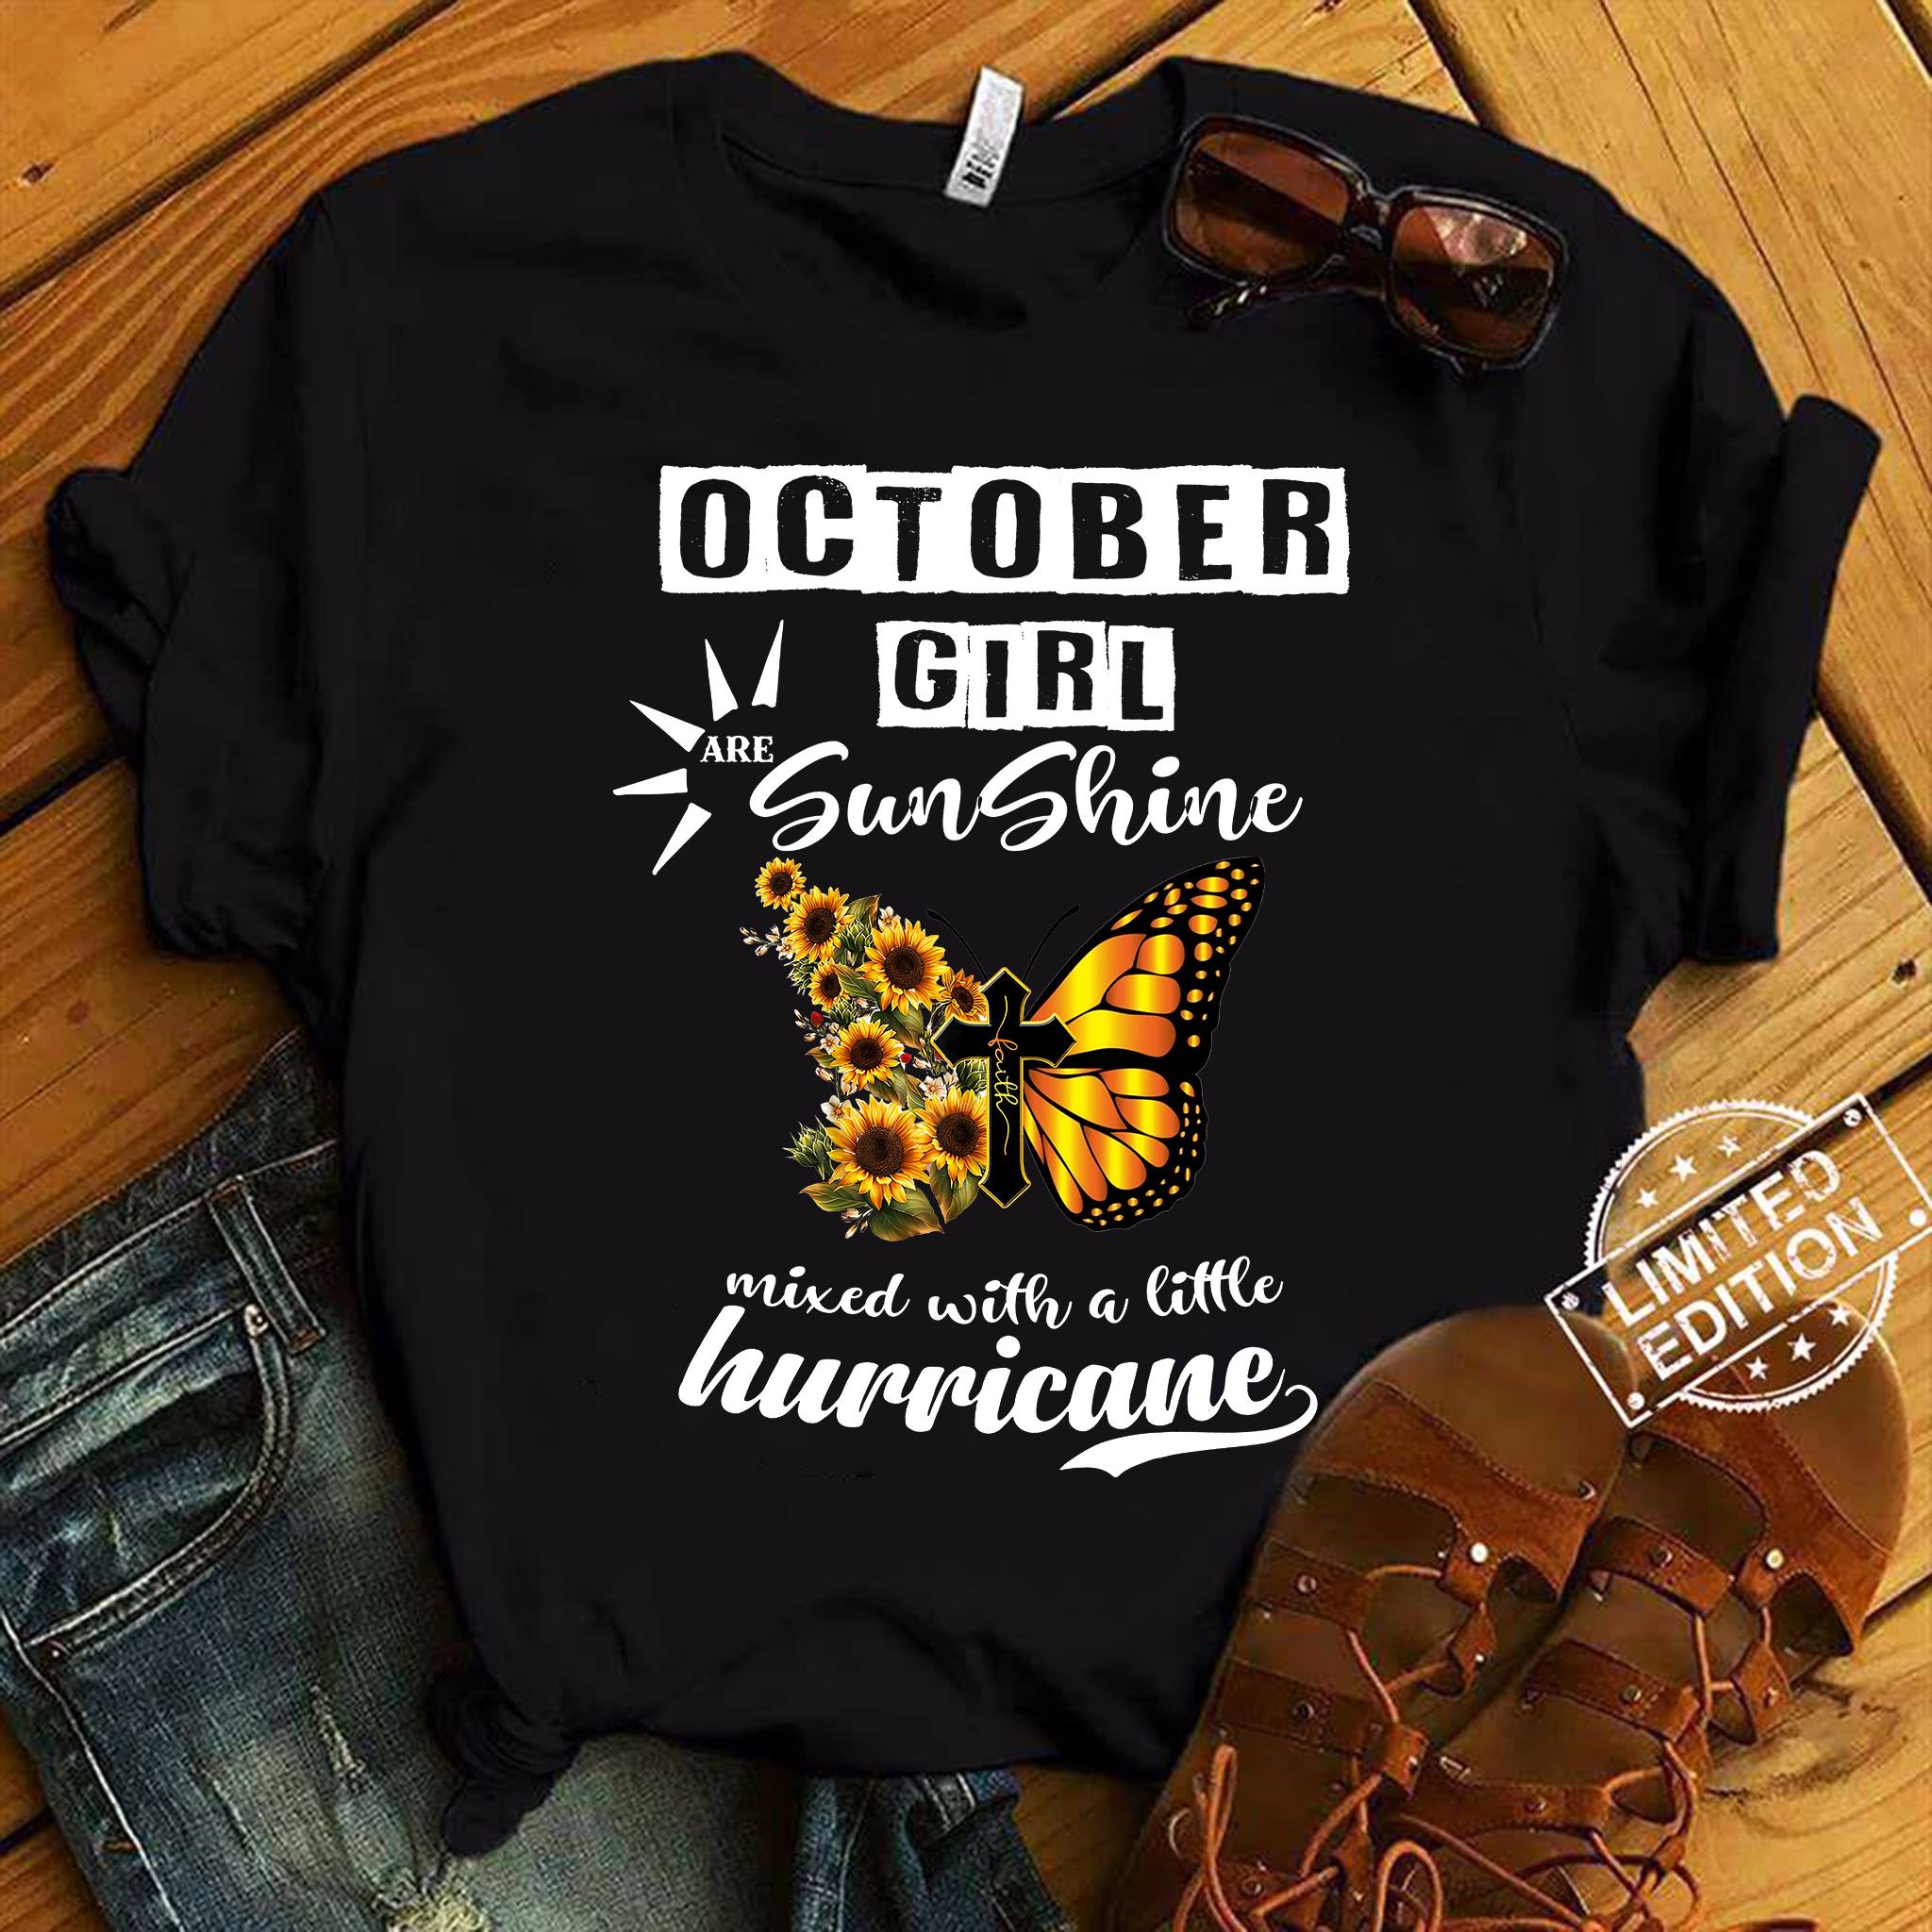 October girl are sunshine mixed with a little hurricane - Butterfly and sunflower